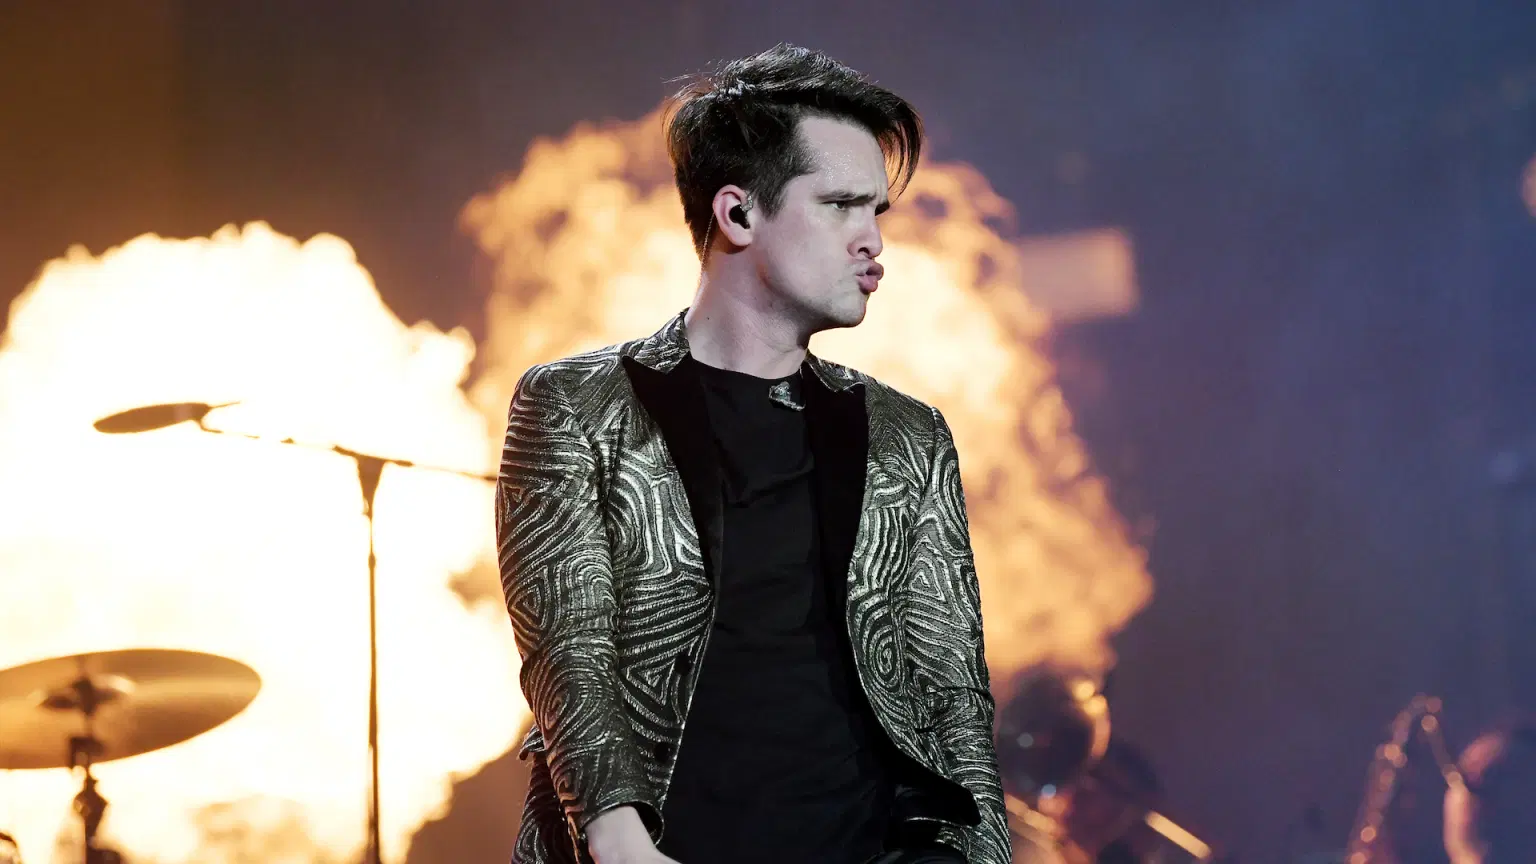 Panic! At The Disco singer Brendon Urie